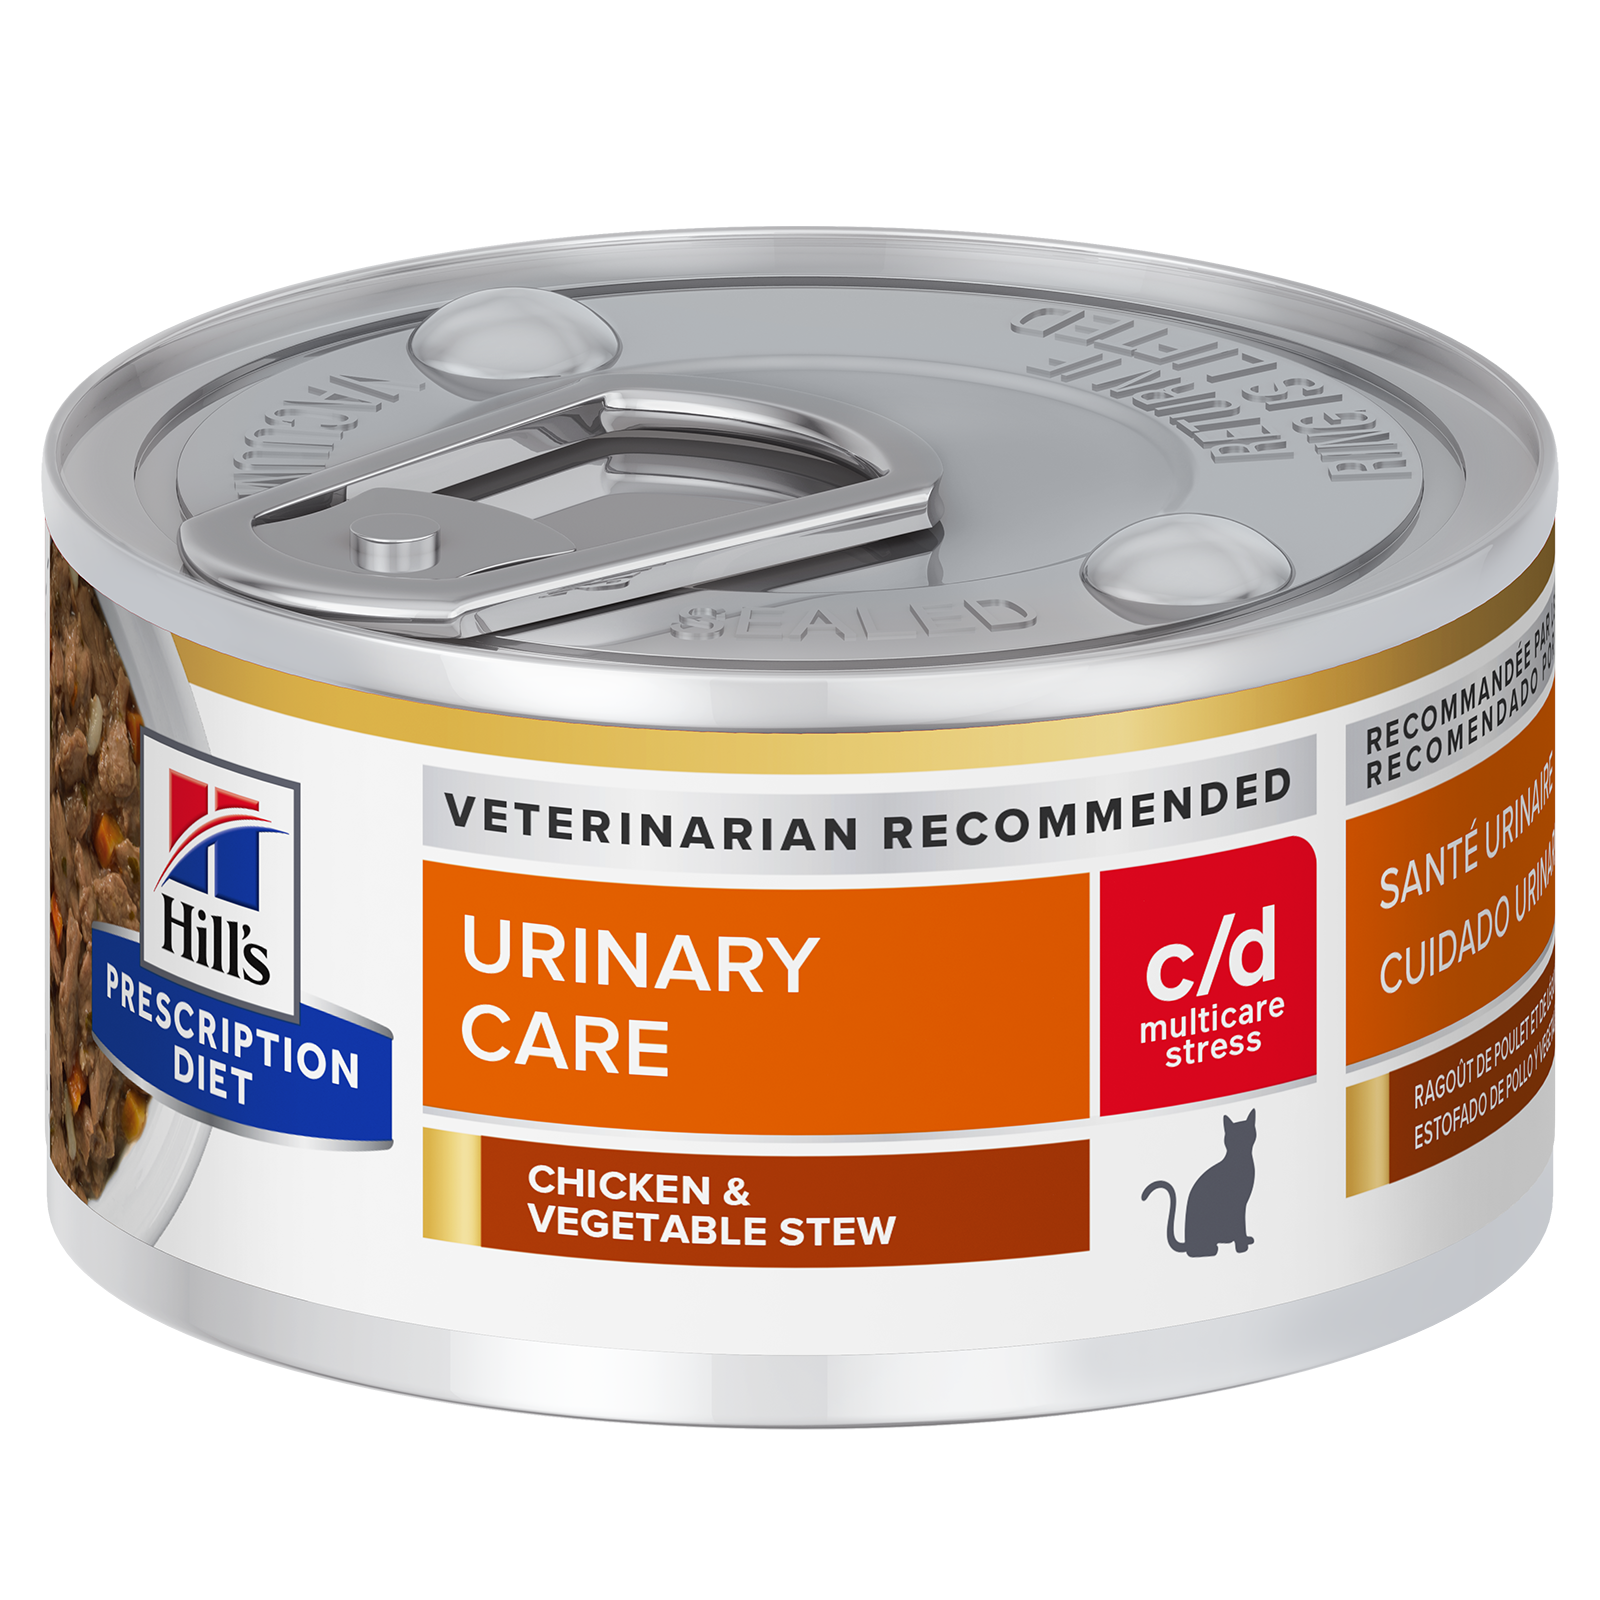 Hill's Prescription Diet Cat Food Can c/d Multicare Stress Urinary Care Chicken & Vegetable Stew